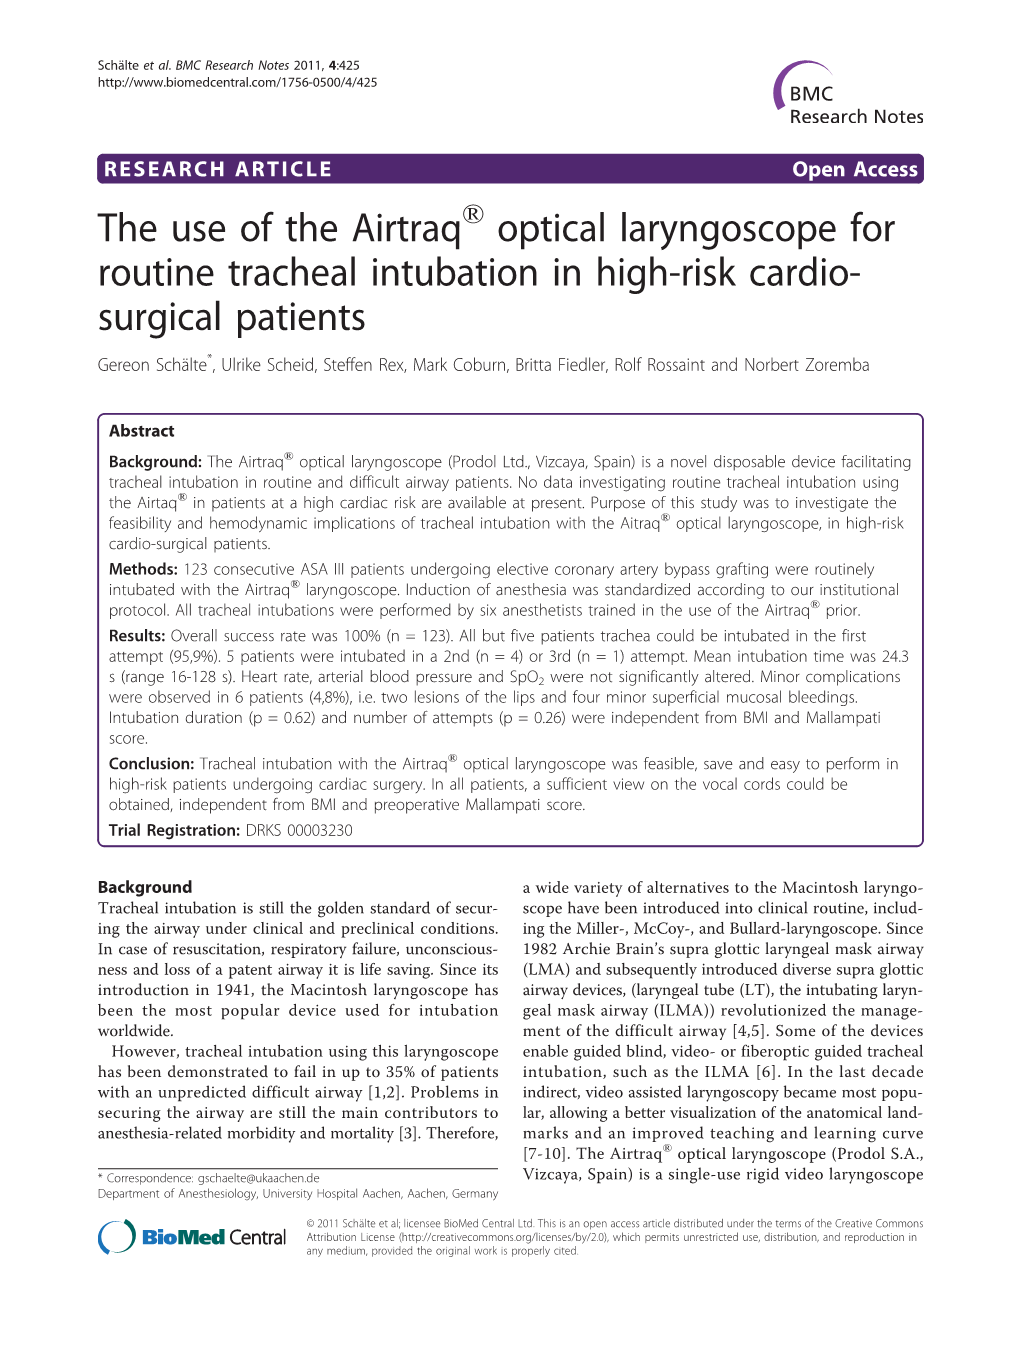 The Use of the Airtraq Optical Laryngoscope for Routine Tracheal